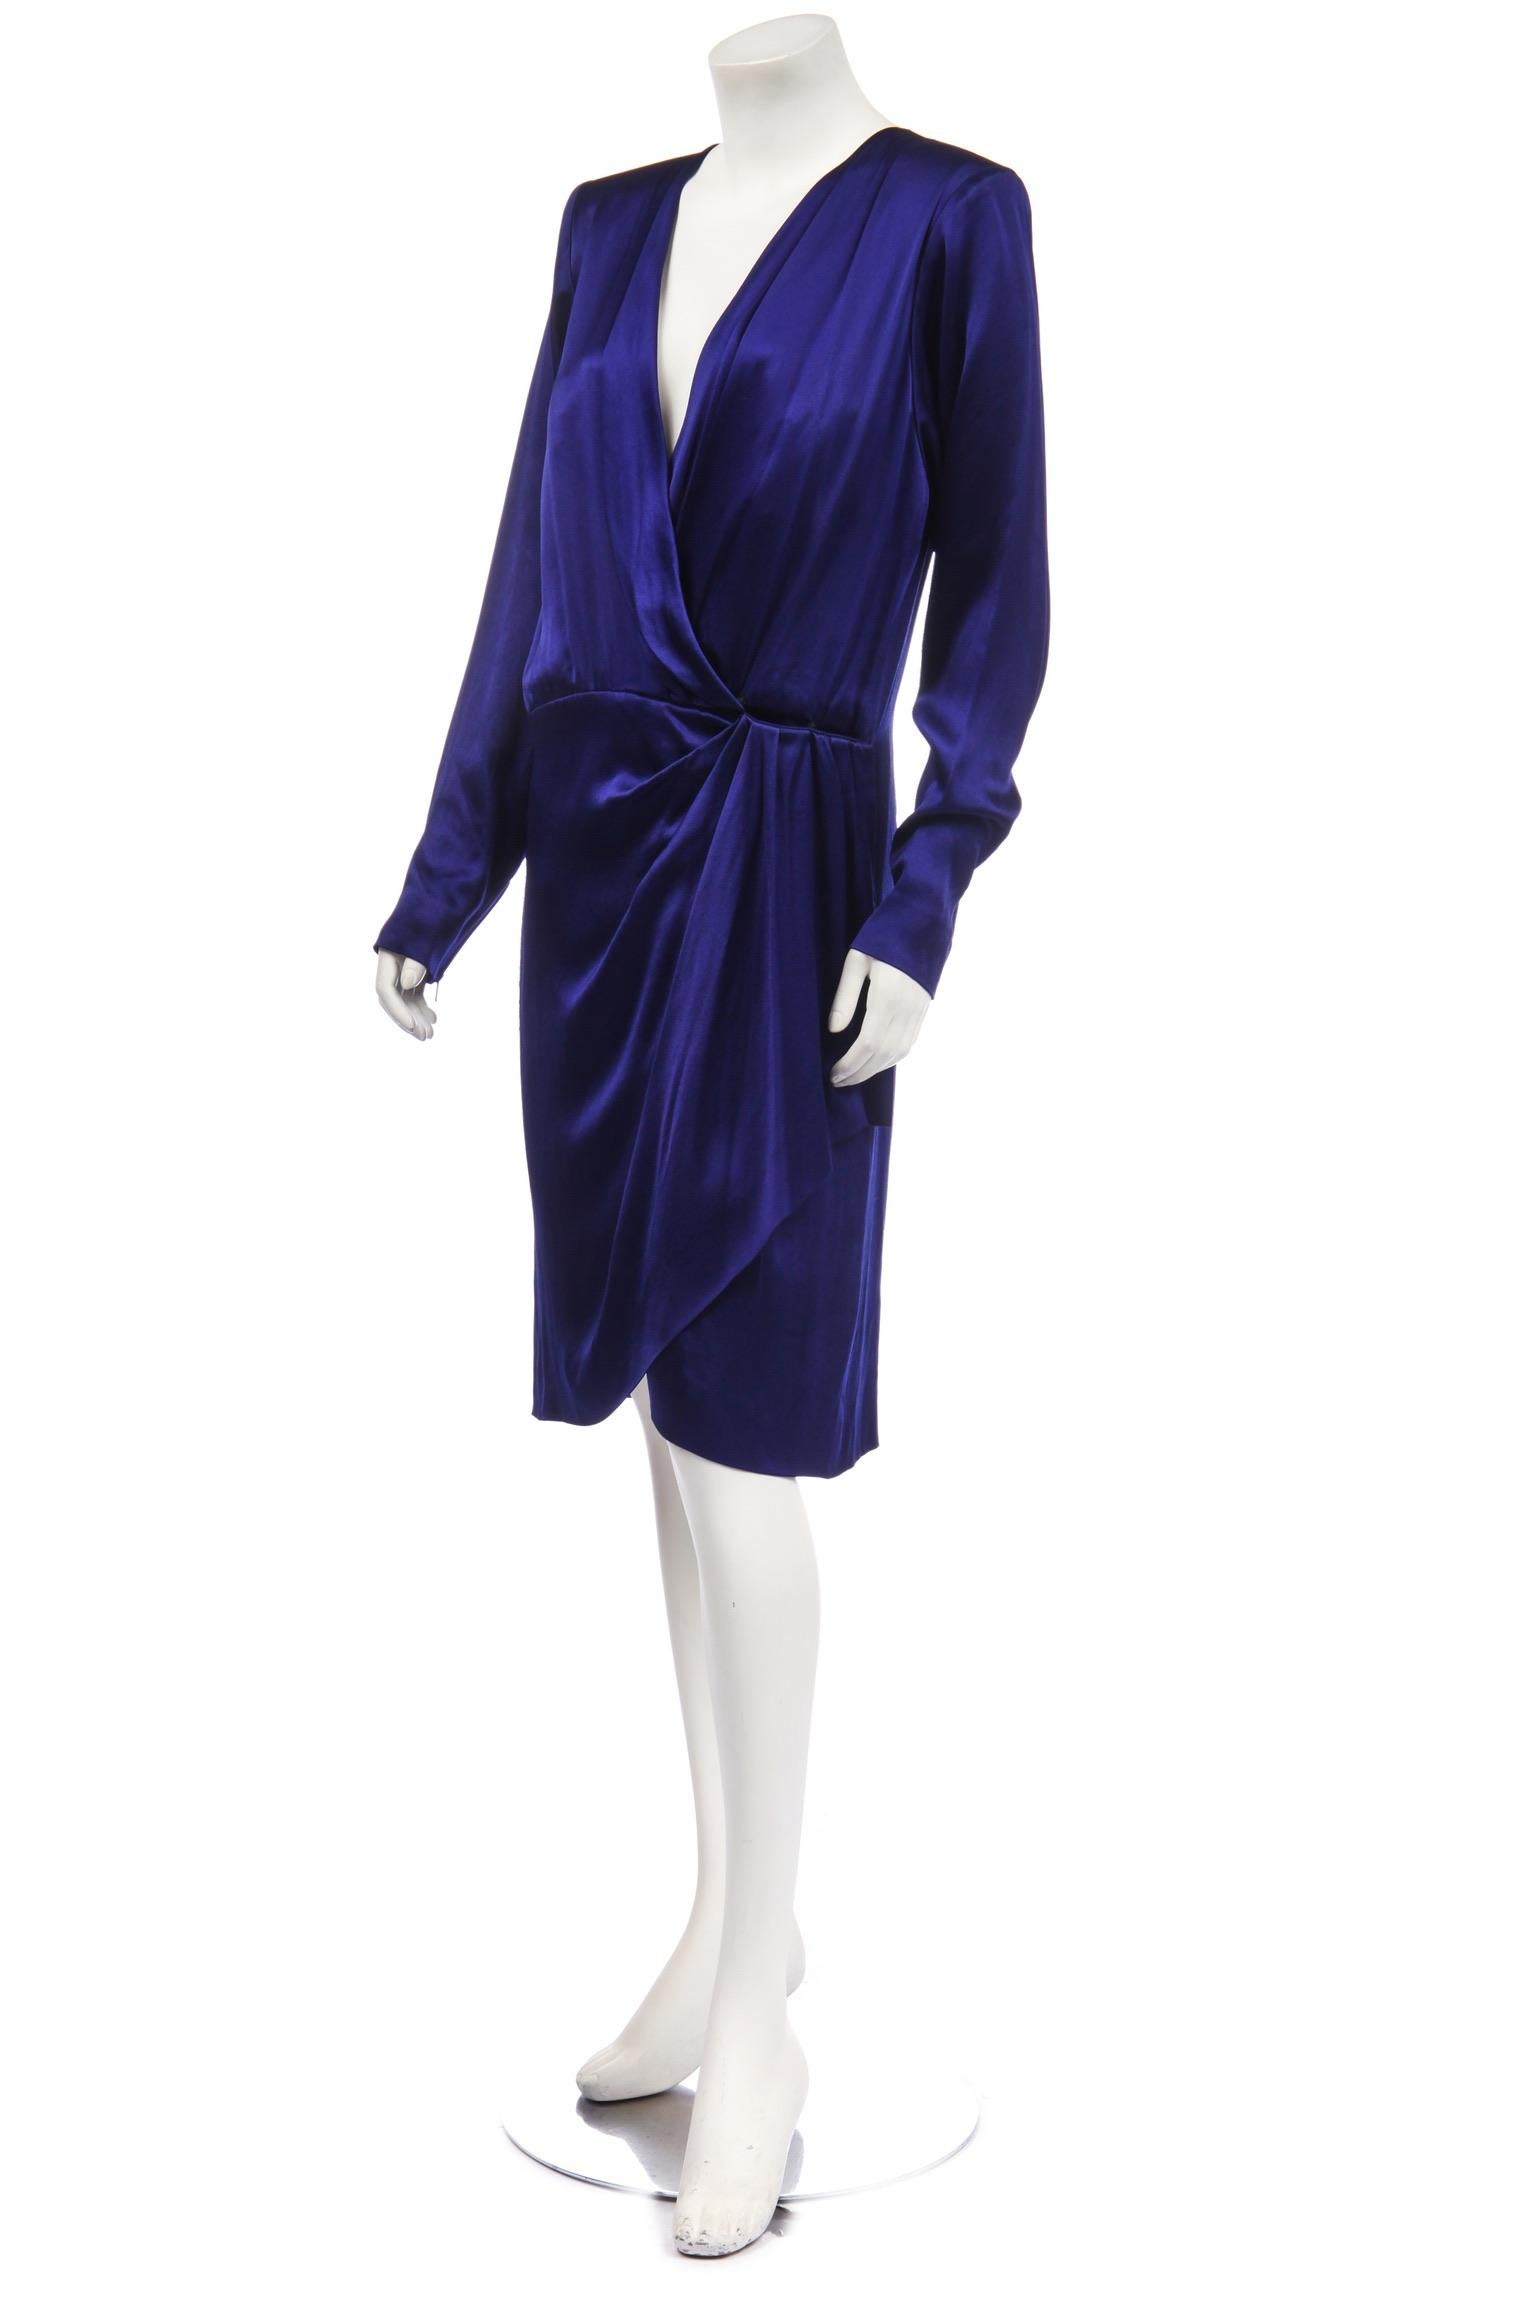 Saint Laurent Rive Gauche A/W 1988 Runway Blue Satin Cocktail Dress  In Good Condition For Sale In London, GB